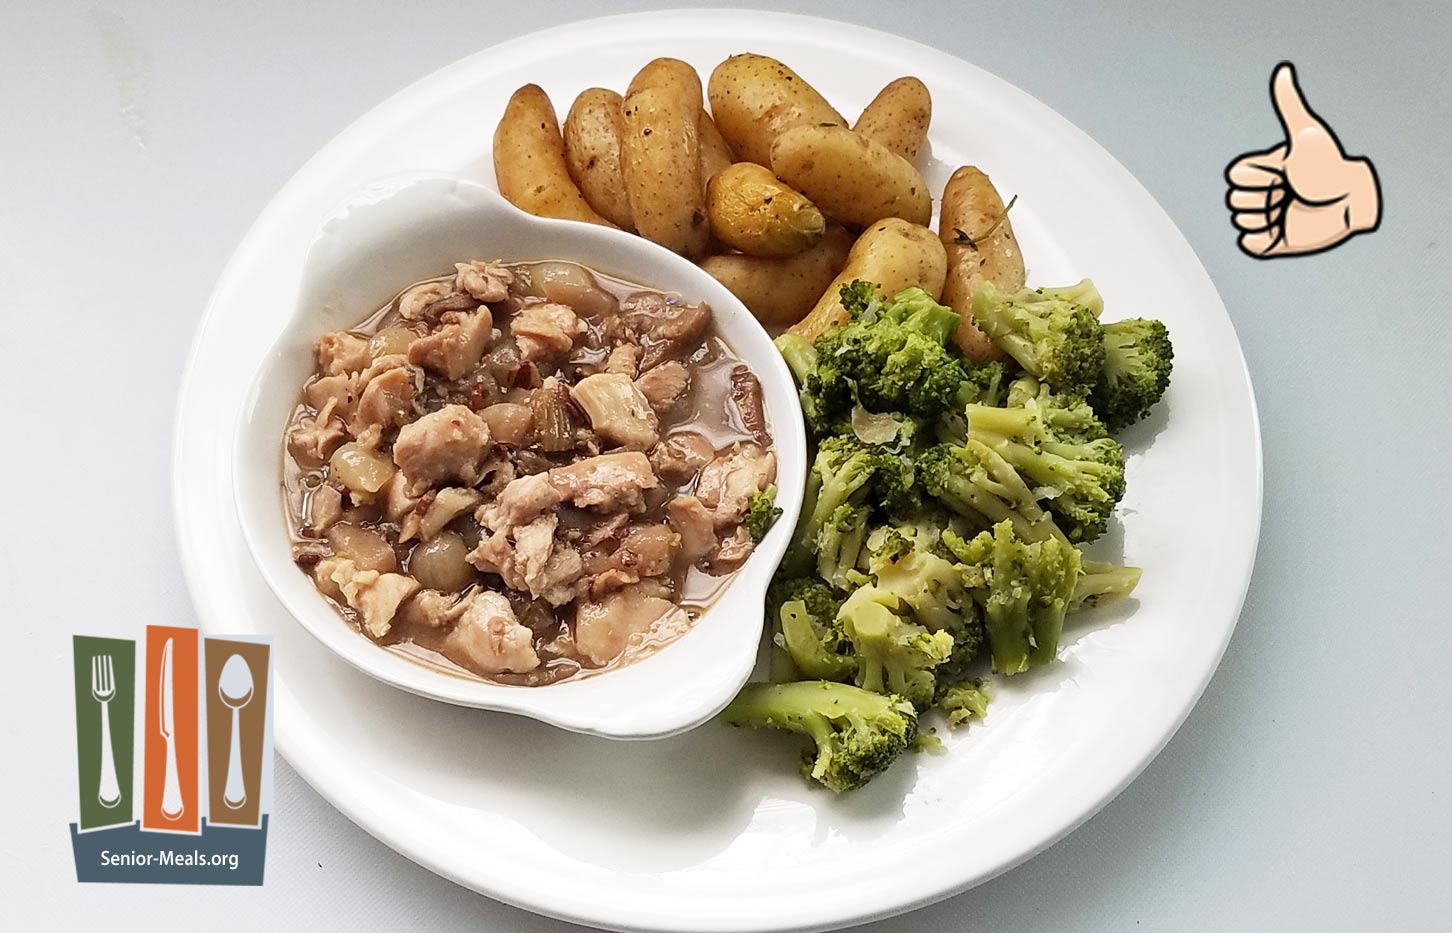 Coq au Vin with Fingerling Potatoes and Broccoli with Onions - $14